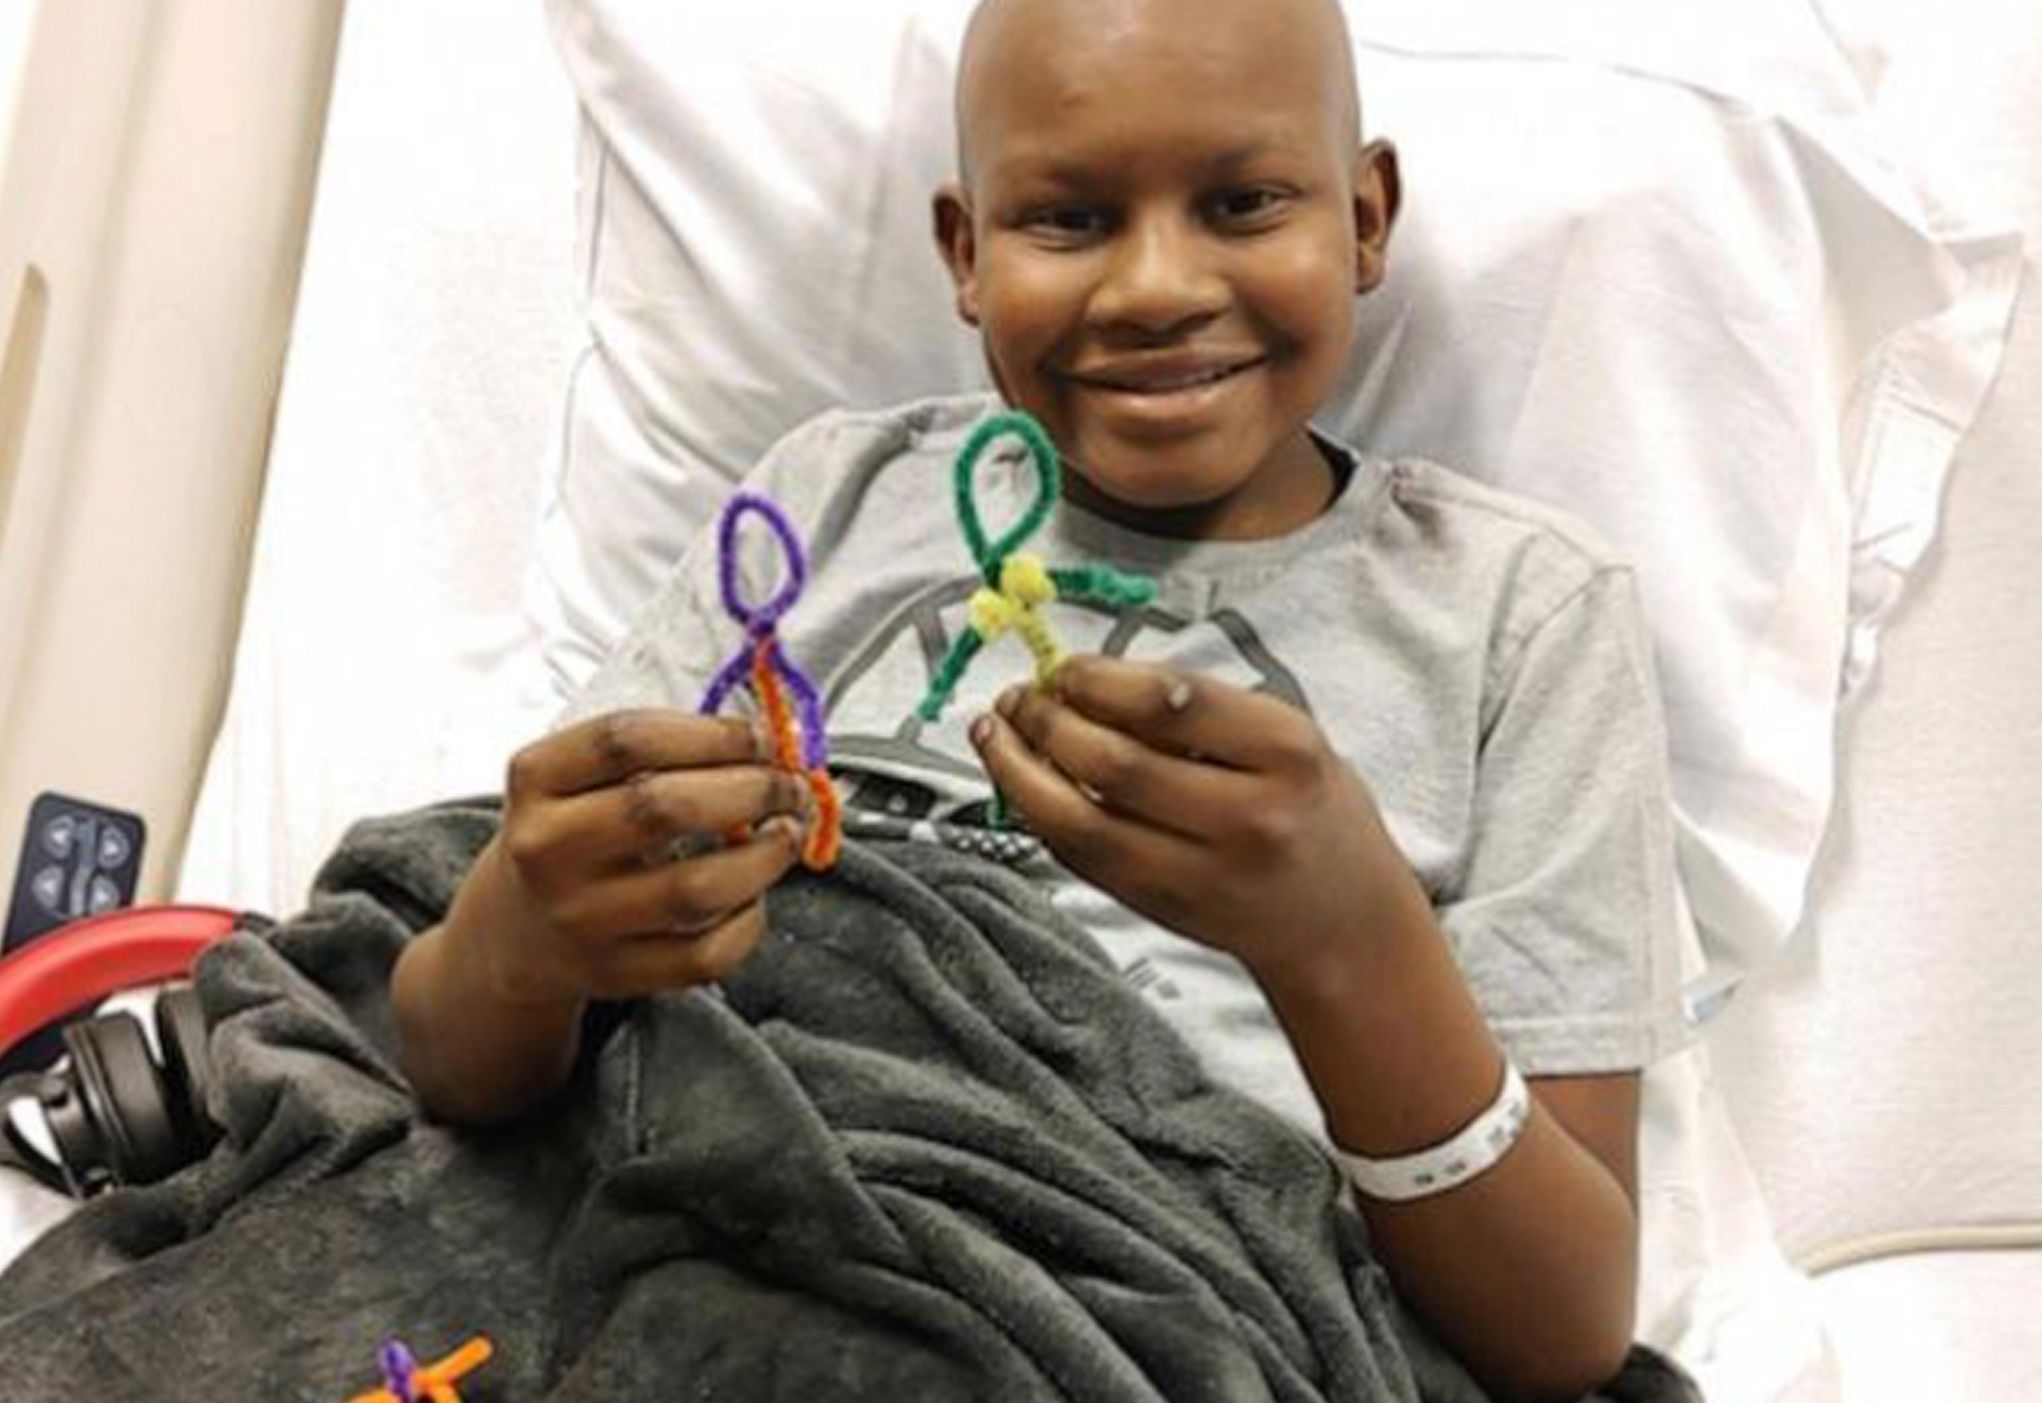 A young boy is holding some colorful scissors.